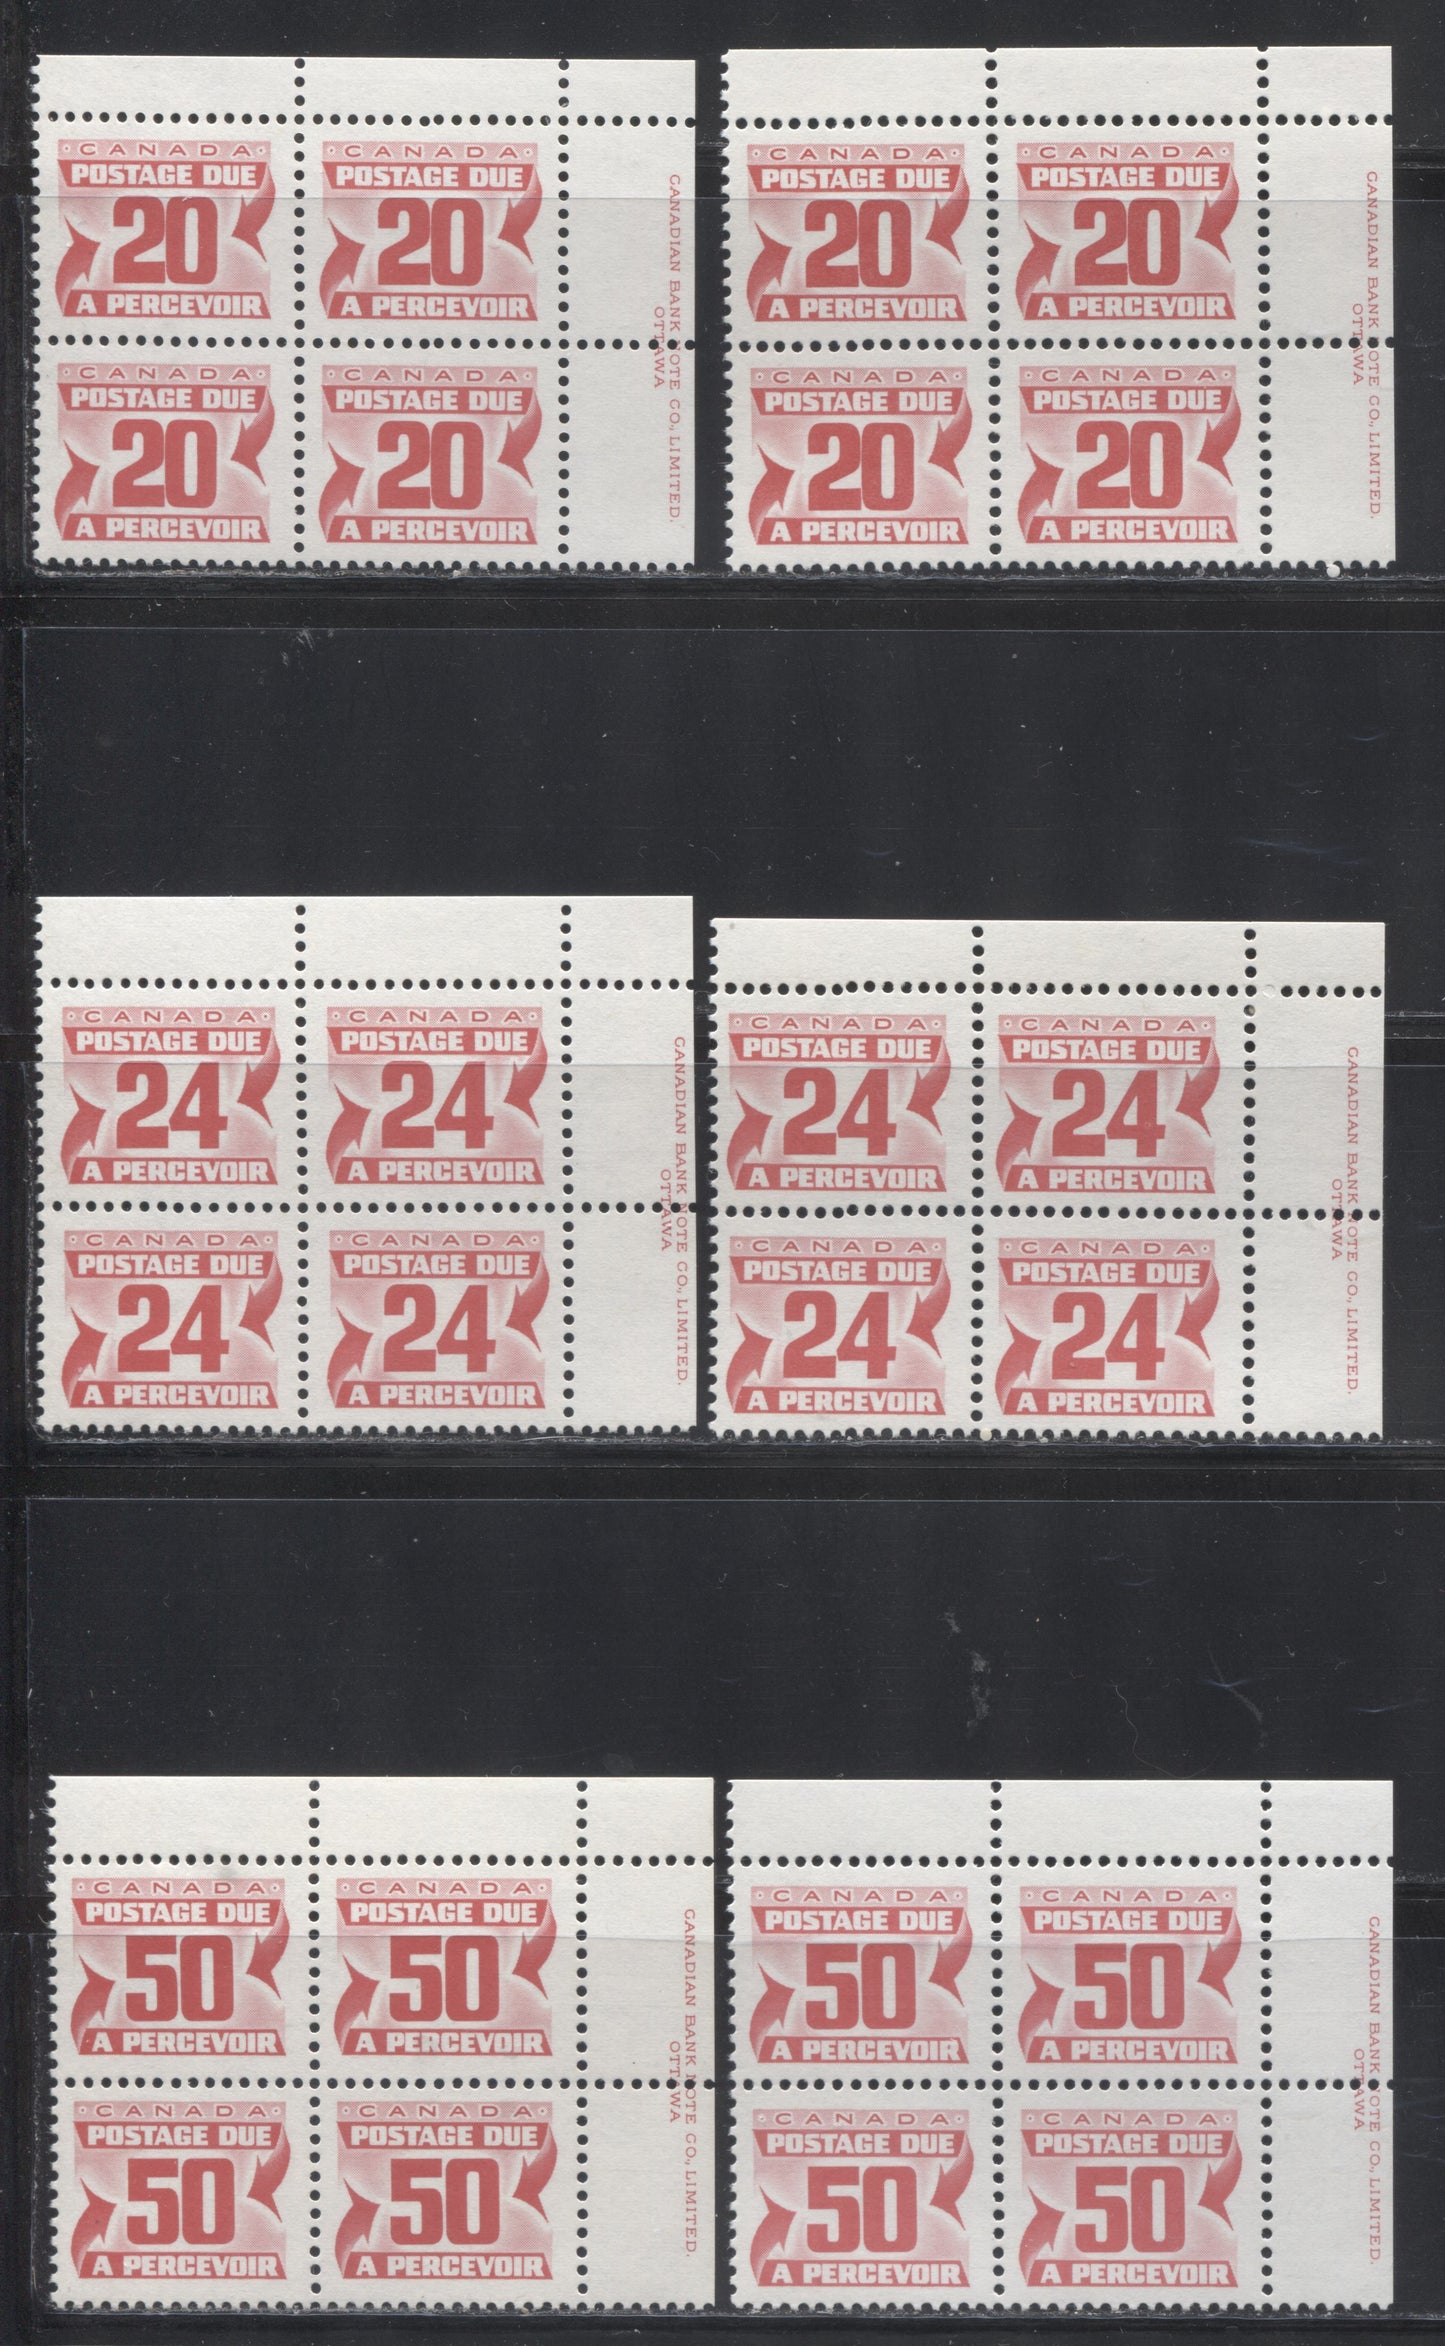 Lot 173 Canada #J38-40 20c, 24c & 50c Carmine Rose 1977-1982, 4th Centennial Postage Due Issue, 6 VFNH UR Inscription Blocks Of 4 On Various DF & LF-fl Papers With PVA Gums, Perf 12.5 x 12